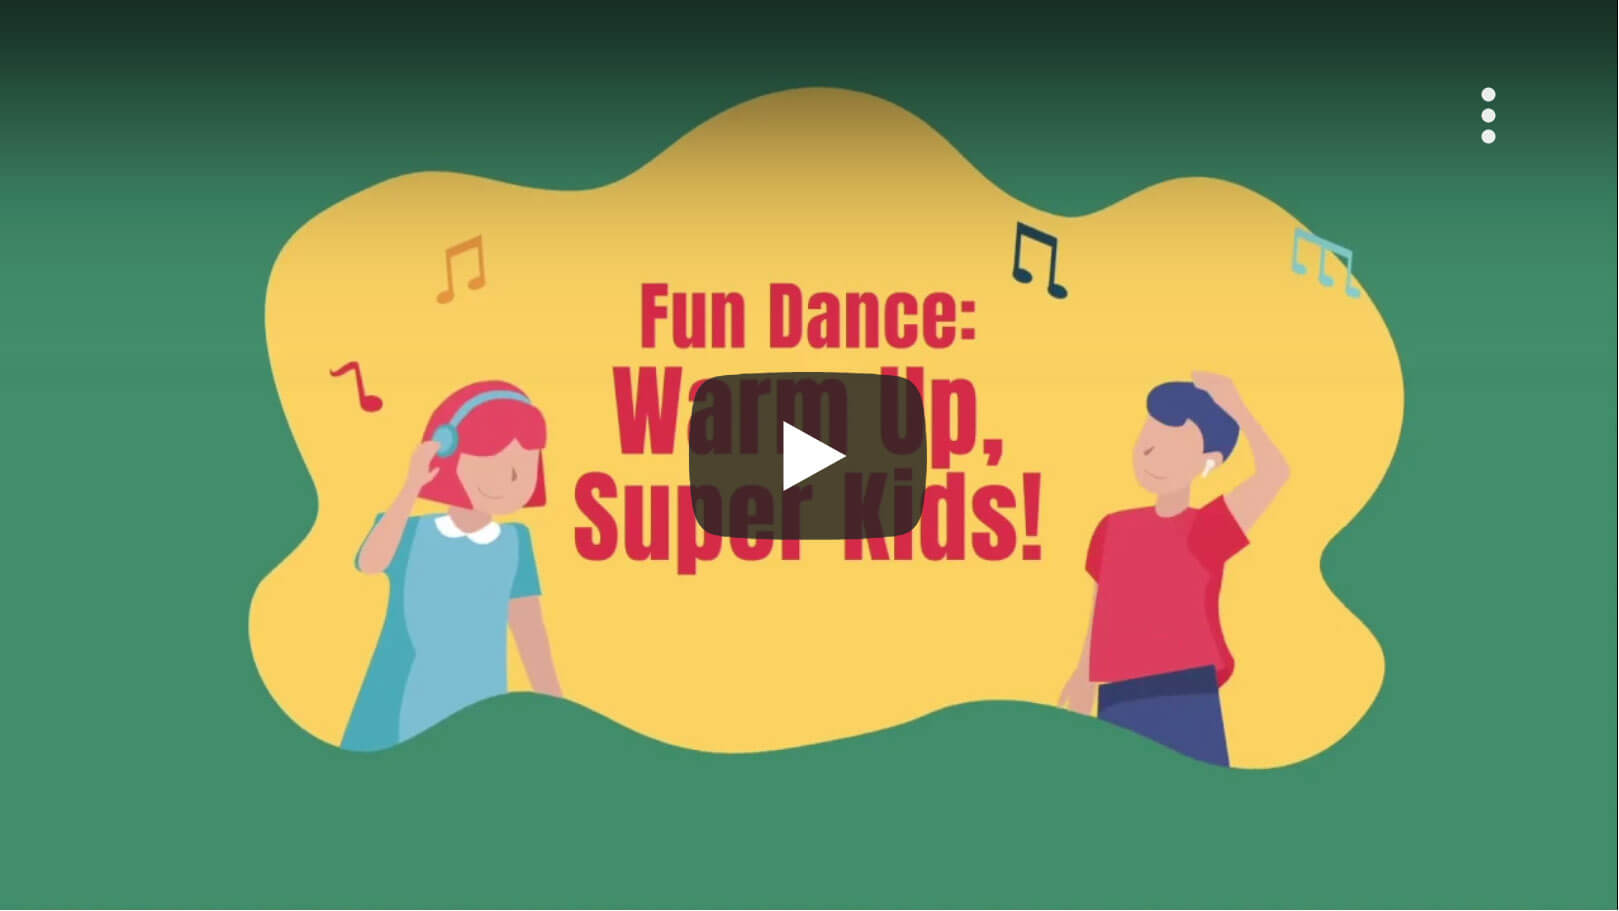 Fun Dance: Warm Up the kiddos for a super active day!